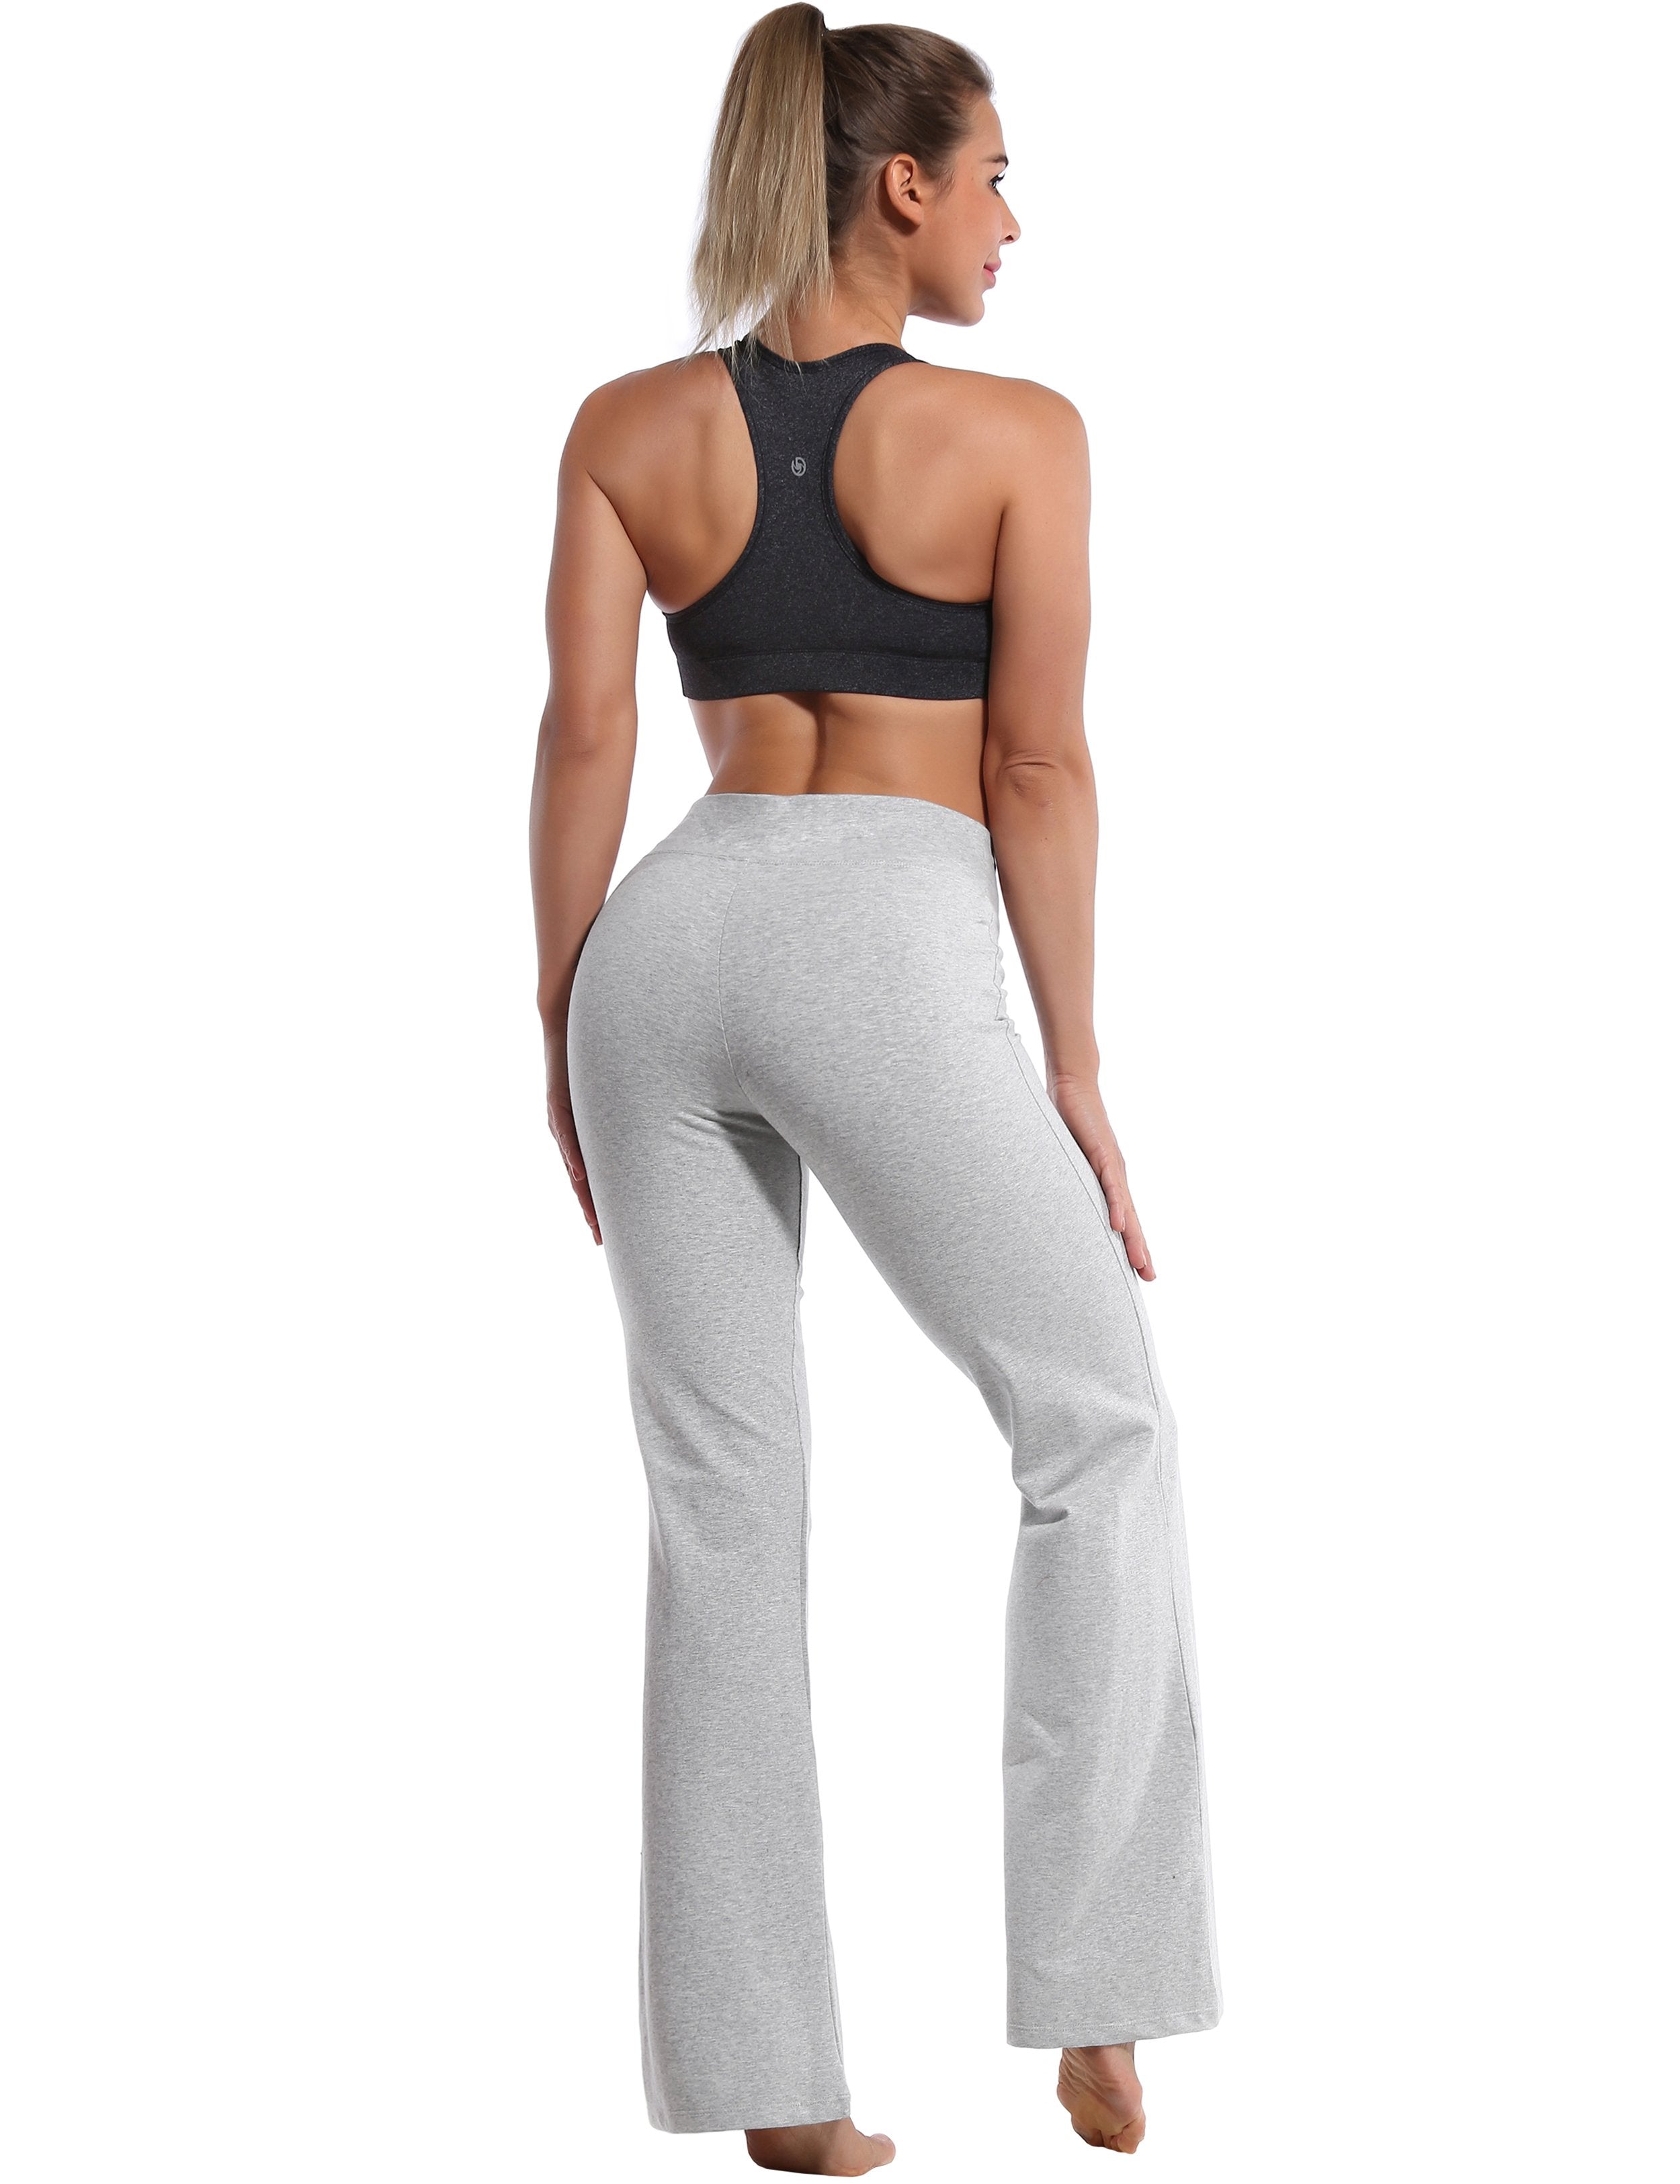 Cotton Bootcut Leggings heathergray 90%Cotton/10%Spandex (soft and cotton feel) Fabric doesn't attract lint easily 4-way stretch No see-through Moisture-wicking Inner pocket Four lengths